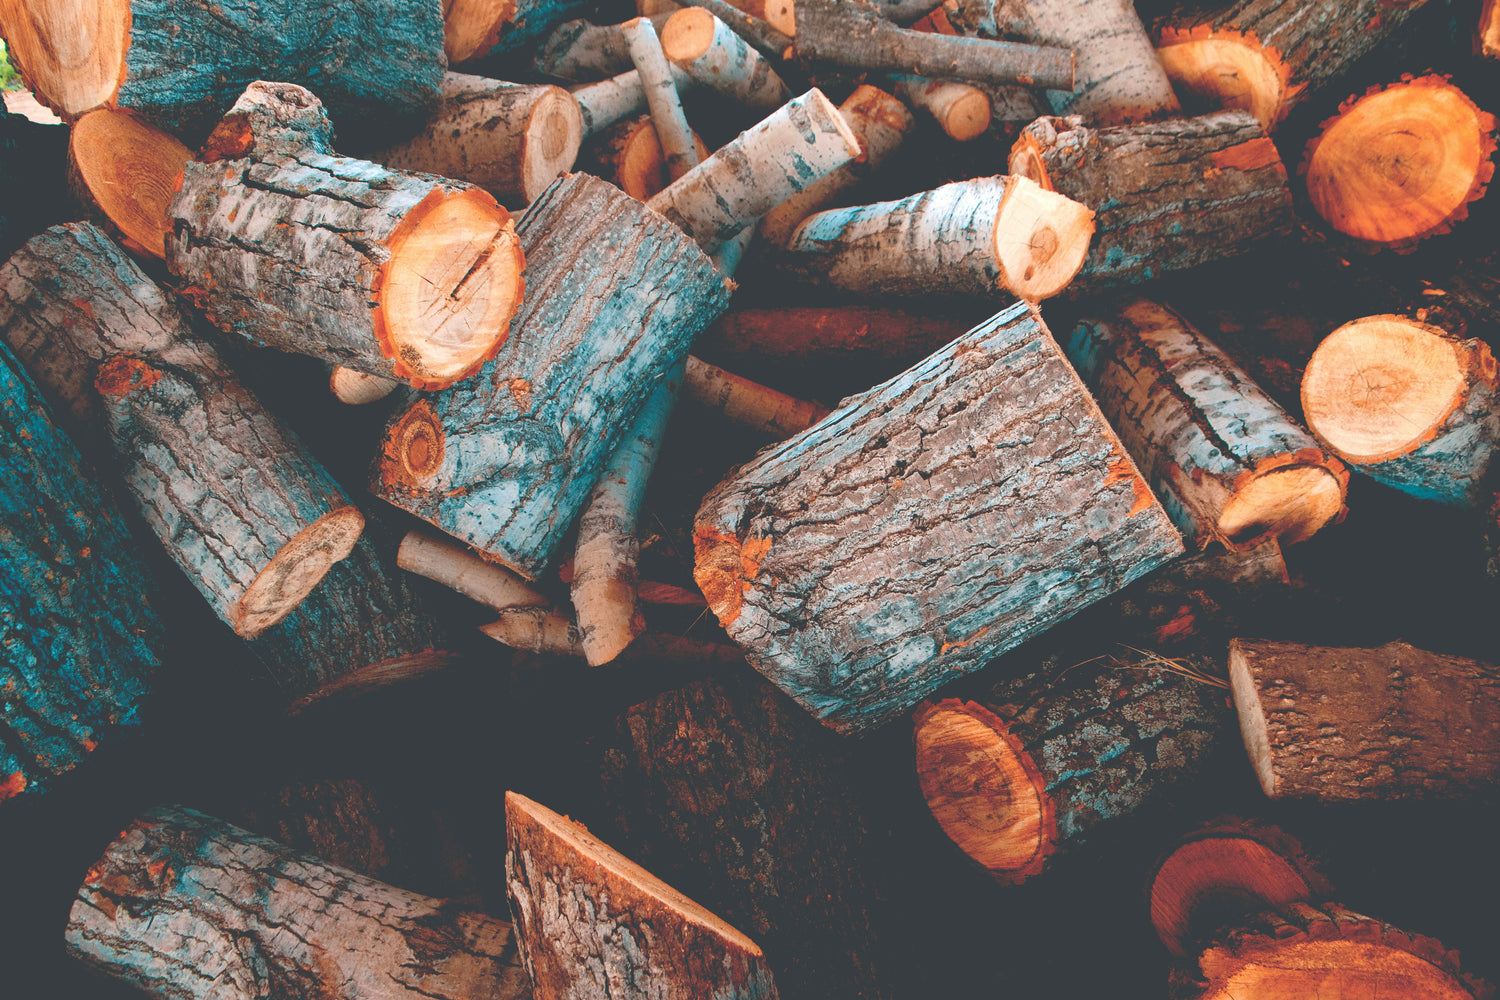 Are Log Burners More Cost-Effective Than Central Heating?